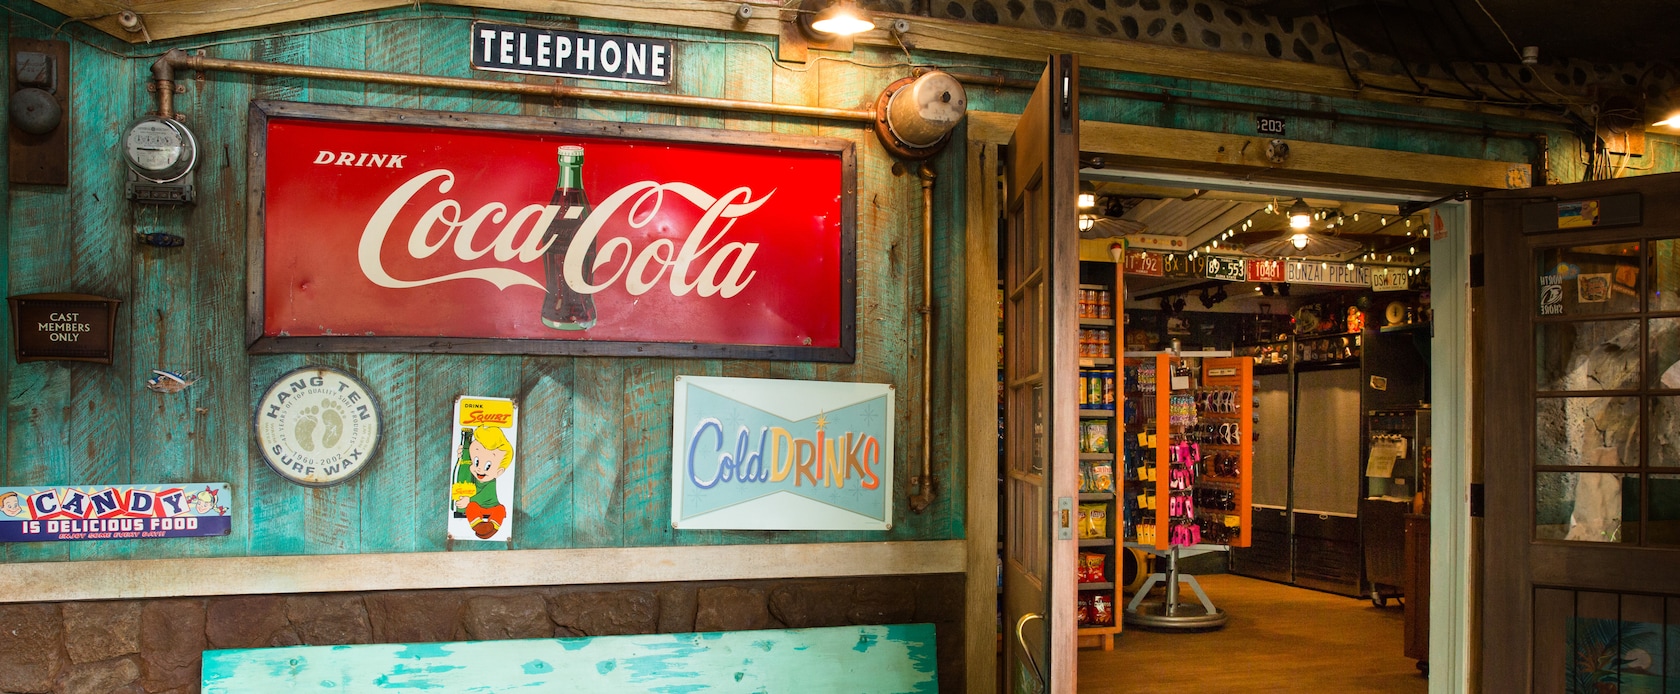 The exterior of Lava Shack snack shop, featuring weathered paint and vintage-style product signs